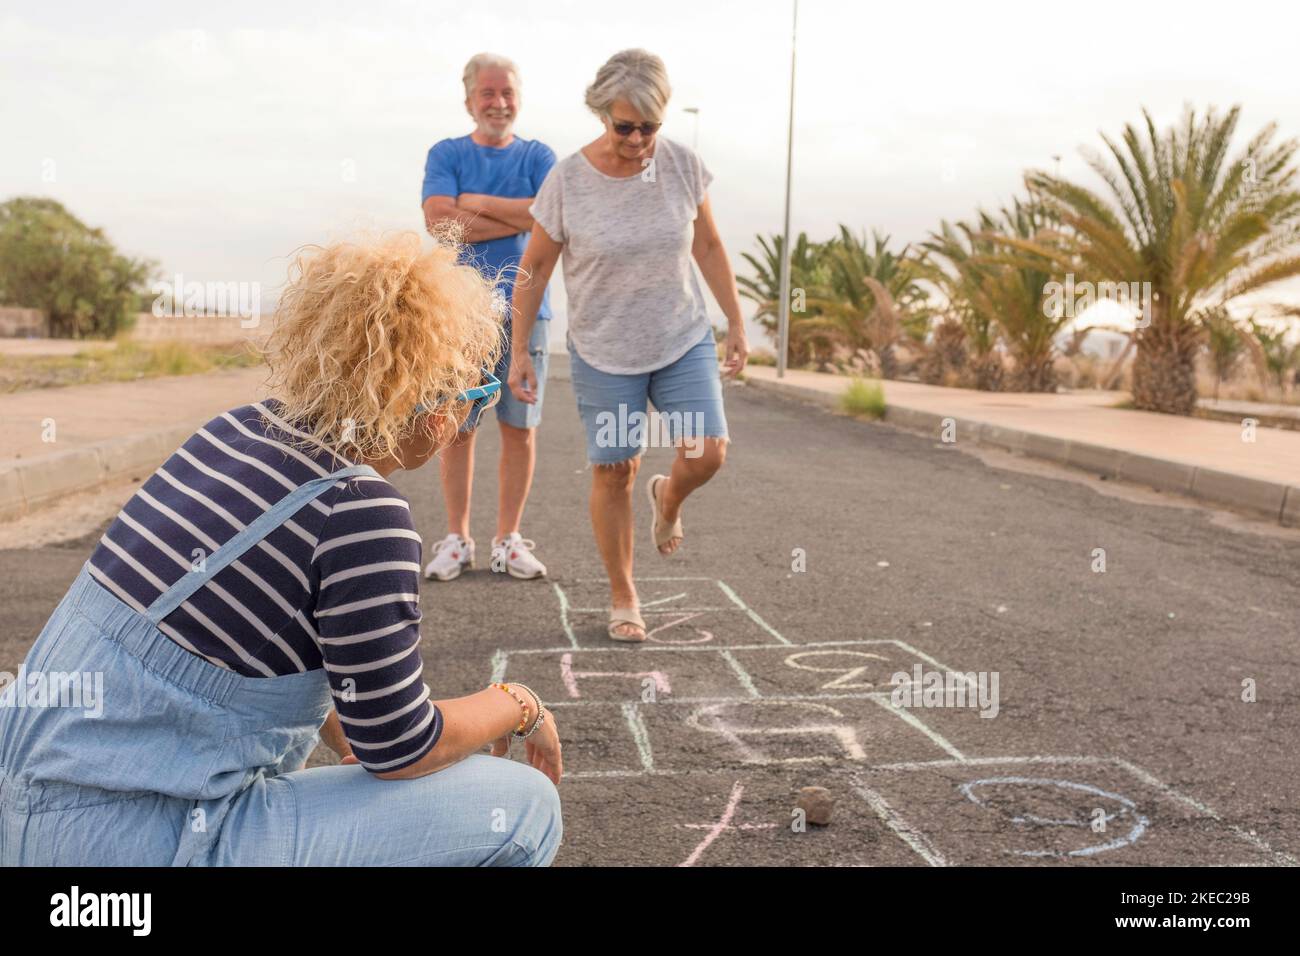 group of three people like adults and senior - two seniors playing at hopscotch with a curly woman looking at the mature woman jumping Stock Photo